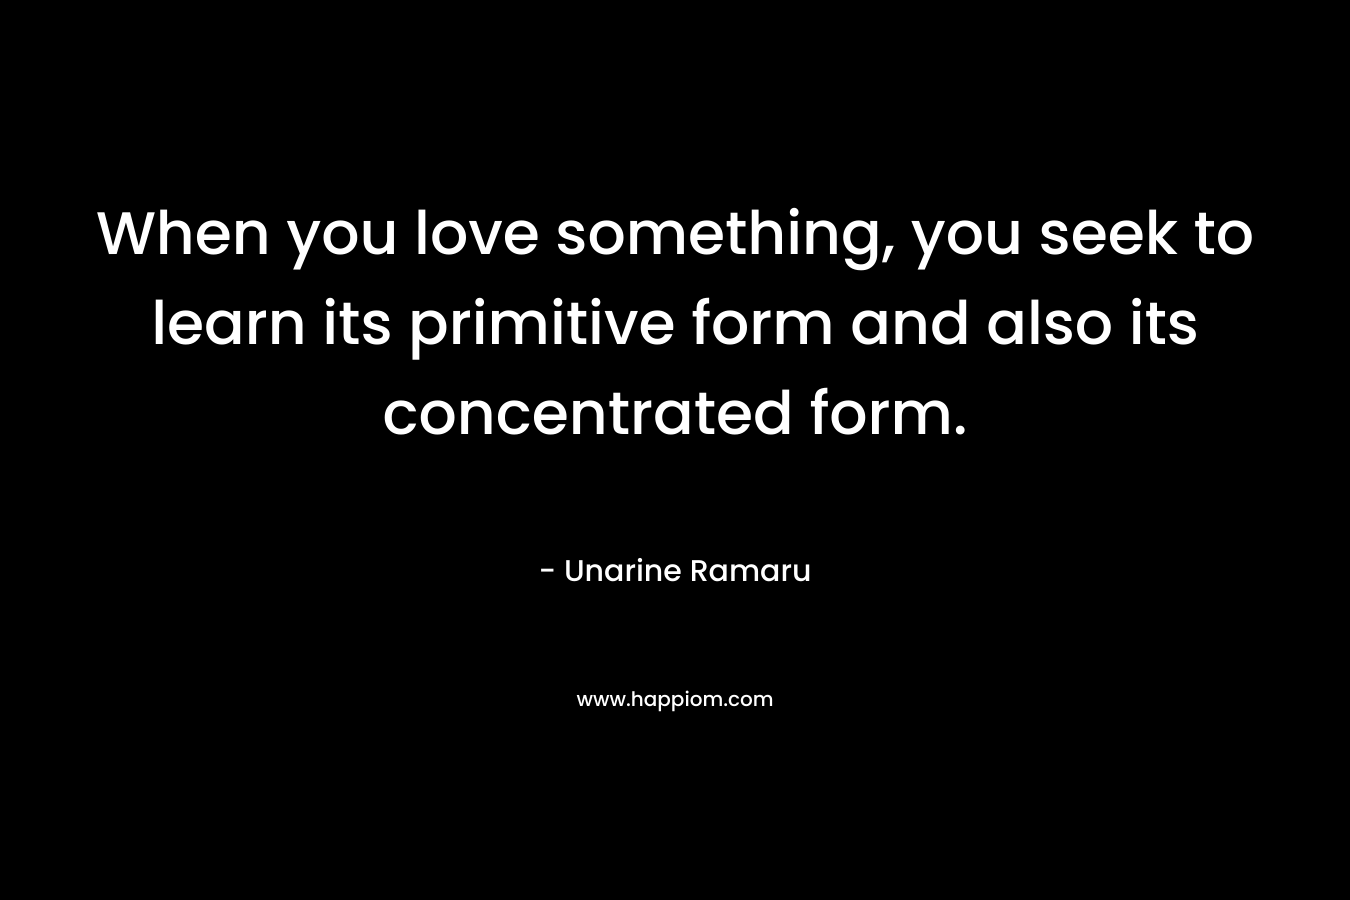 When you love something, you seek to learn its primitive form and also its concentrated form. – Unarine Ramaru